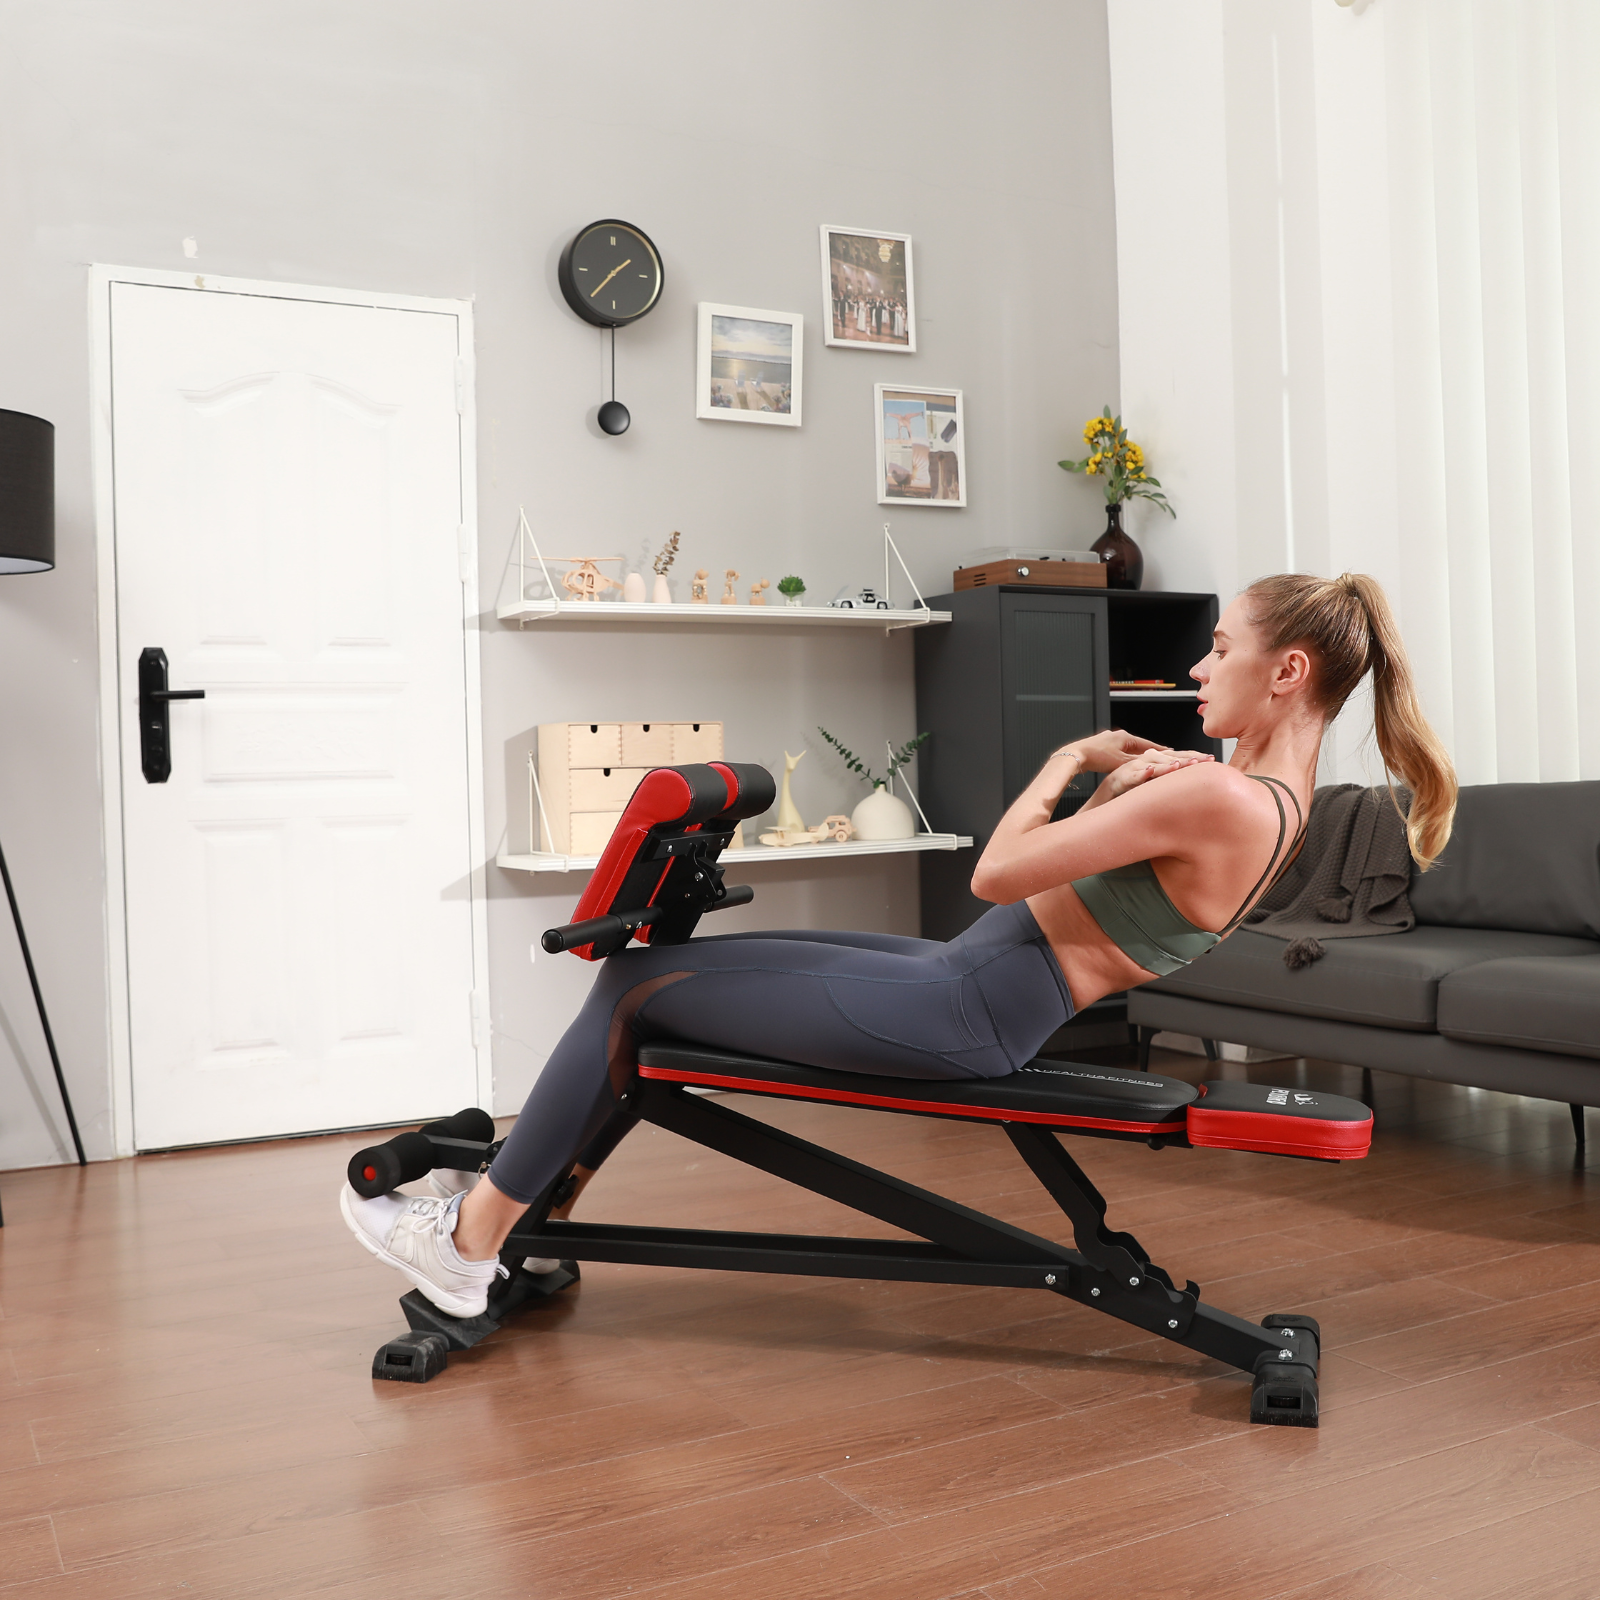 How to Use a Back Extension Machine (Hyperextension Bench/Roman Chair): 7  Best Exercises You Can Do Using This Machine